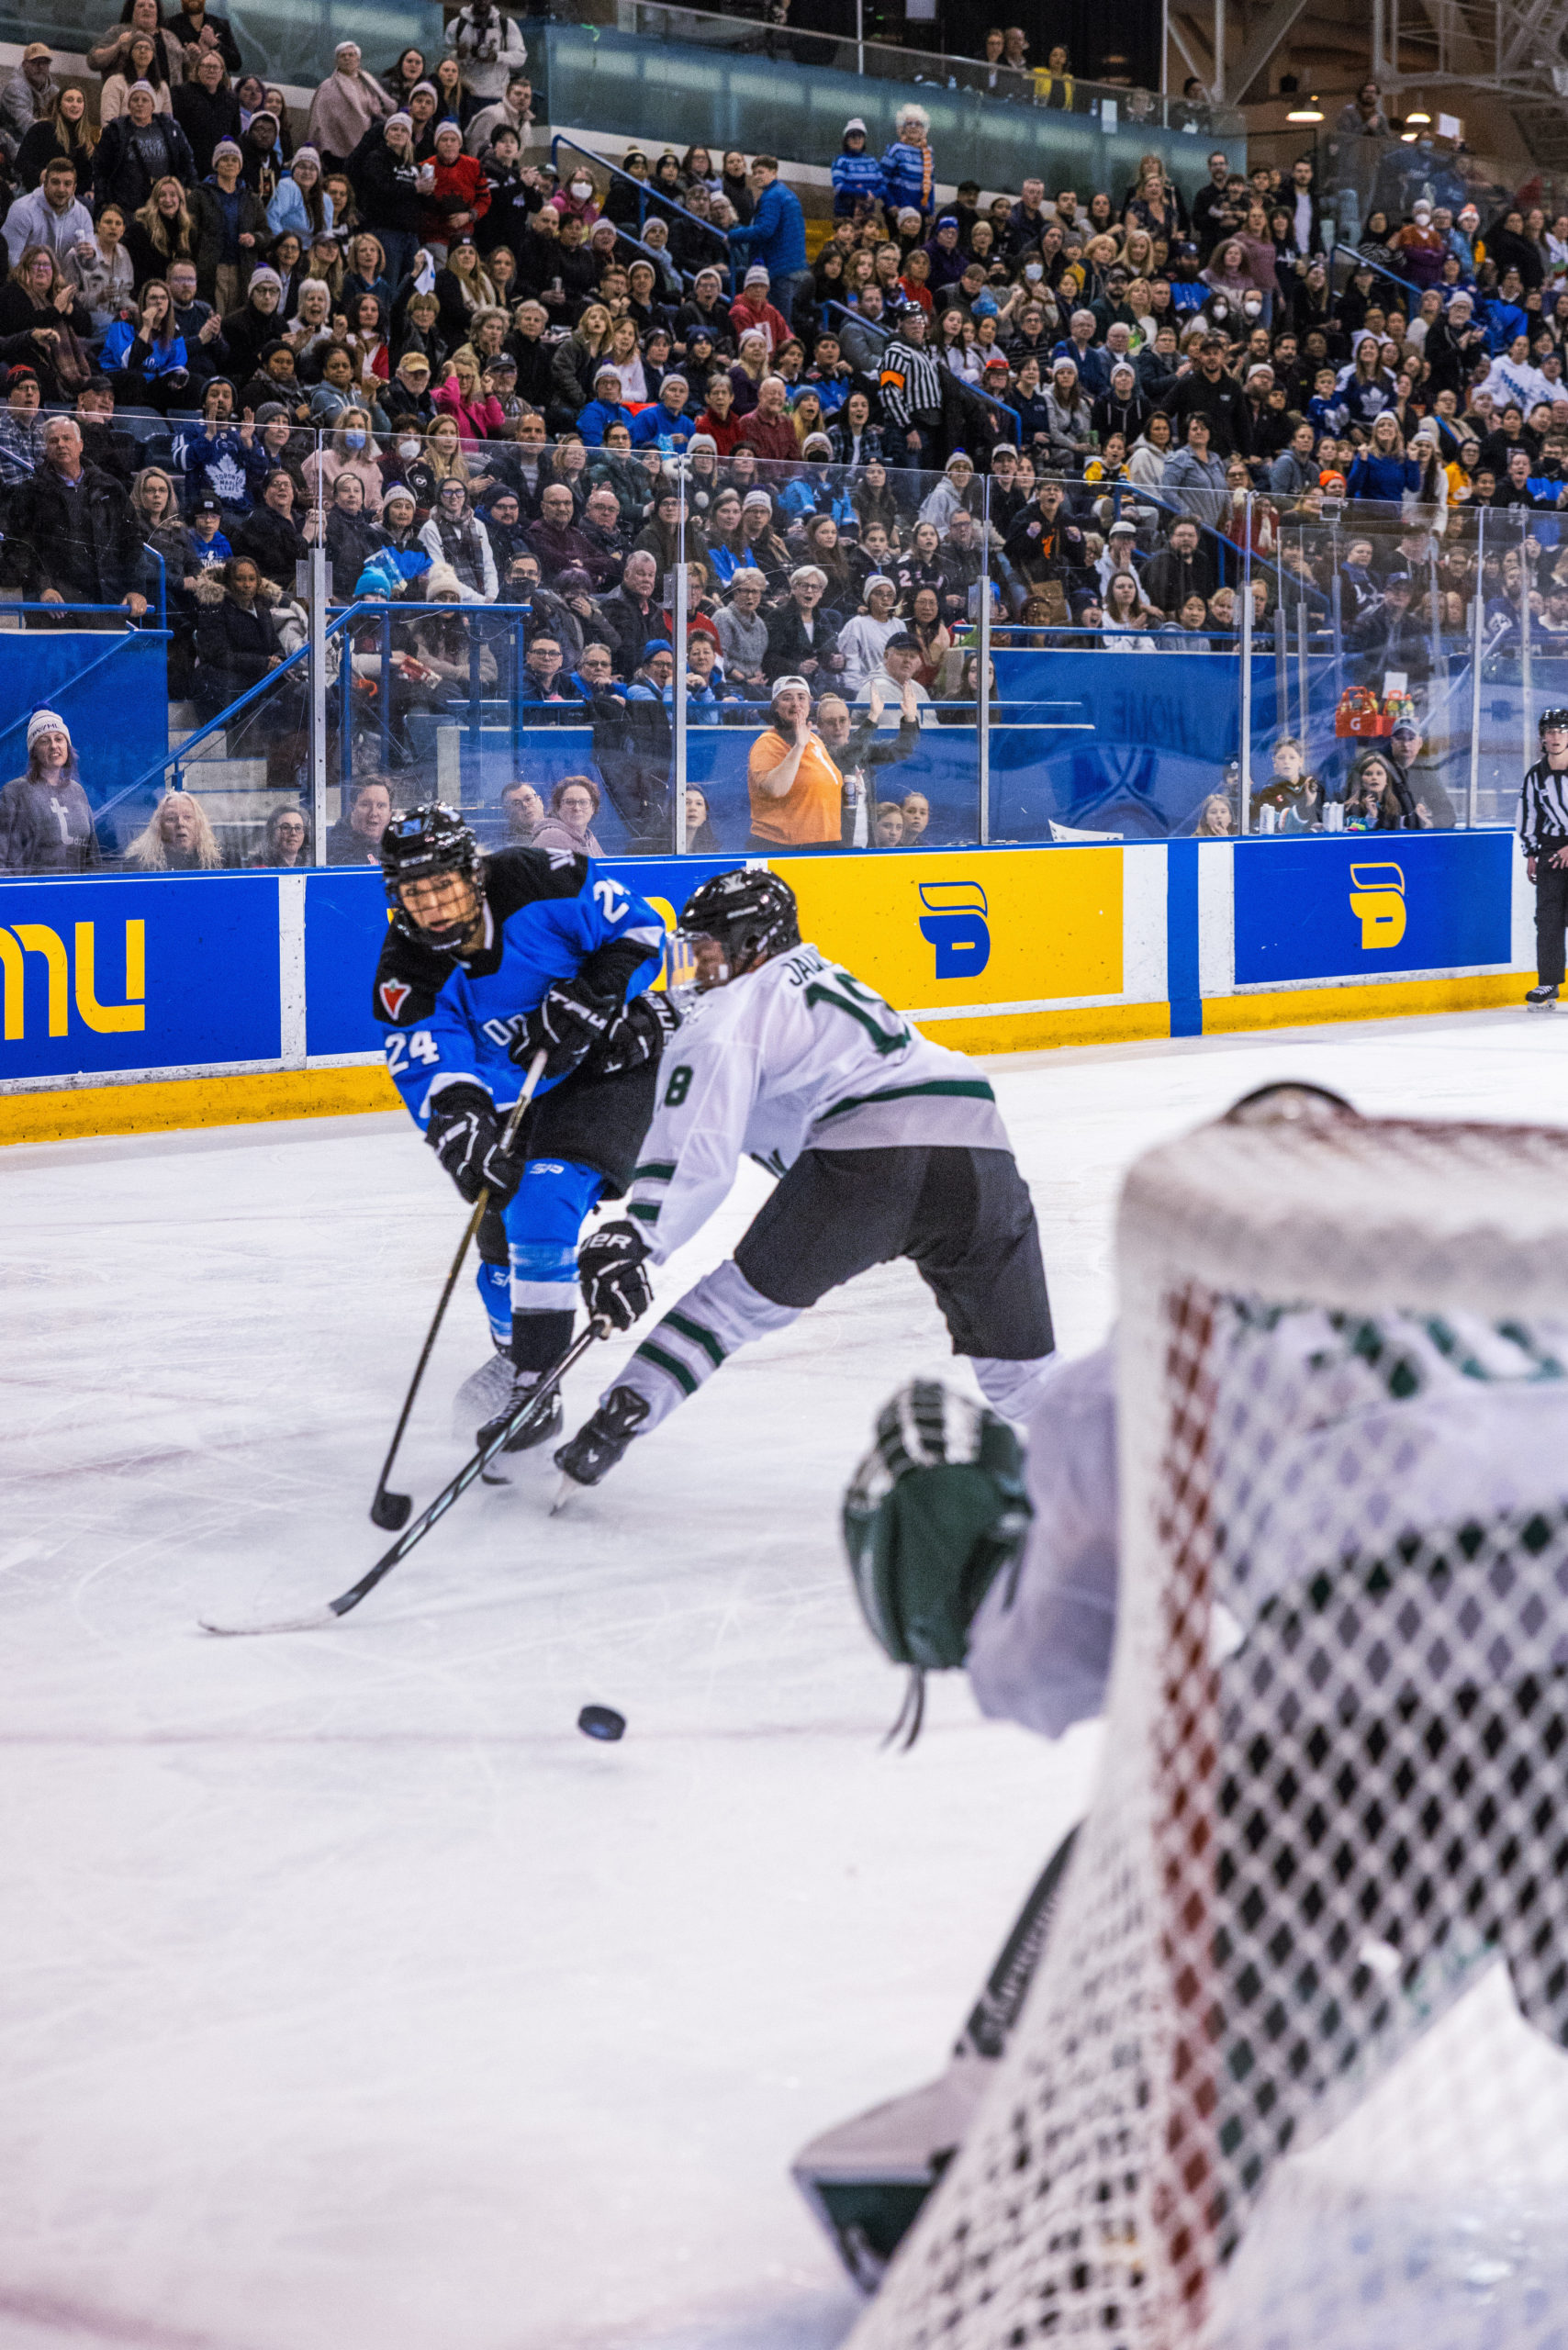 A PWHL Toronto player shoots the puck at the PWHL Boston goal